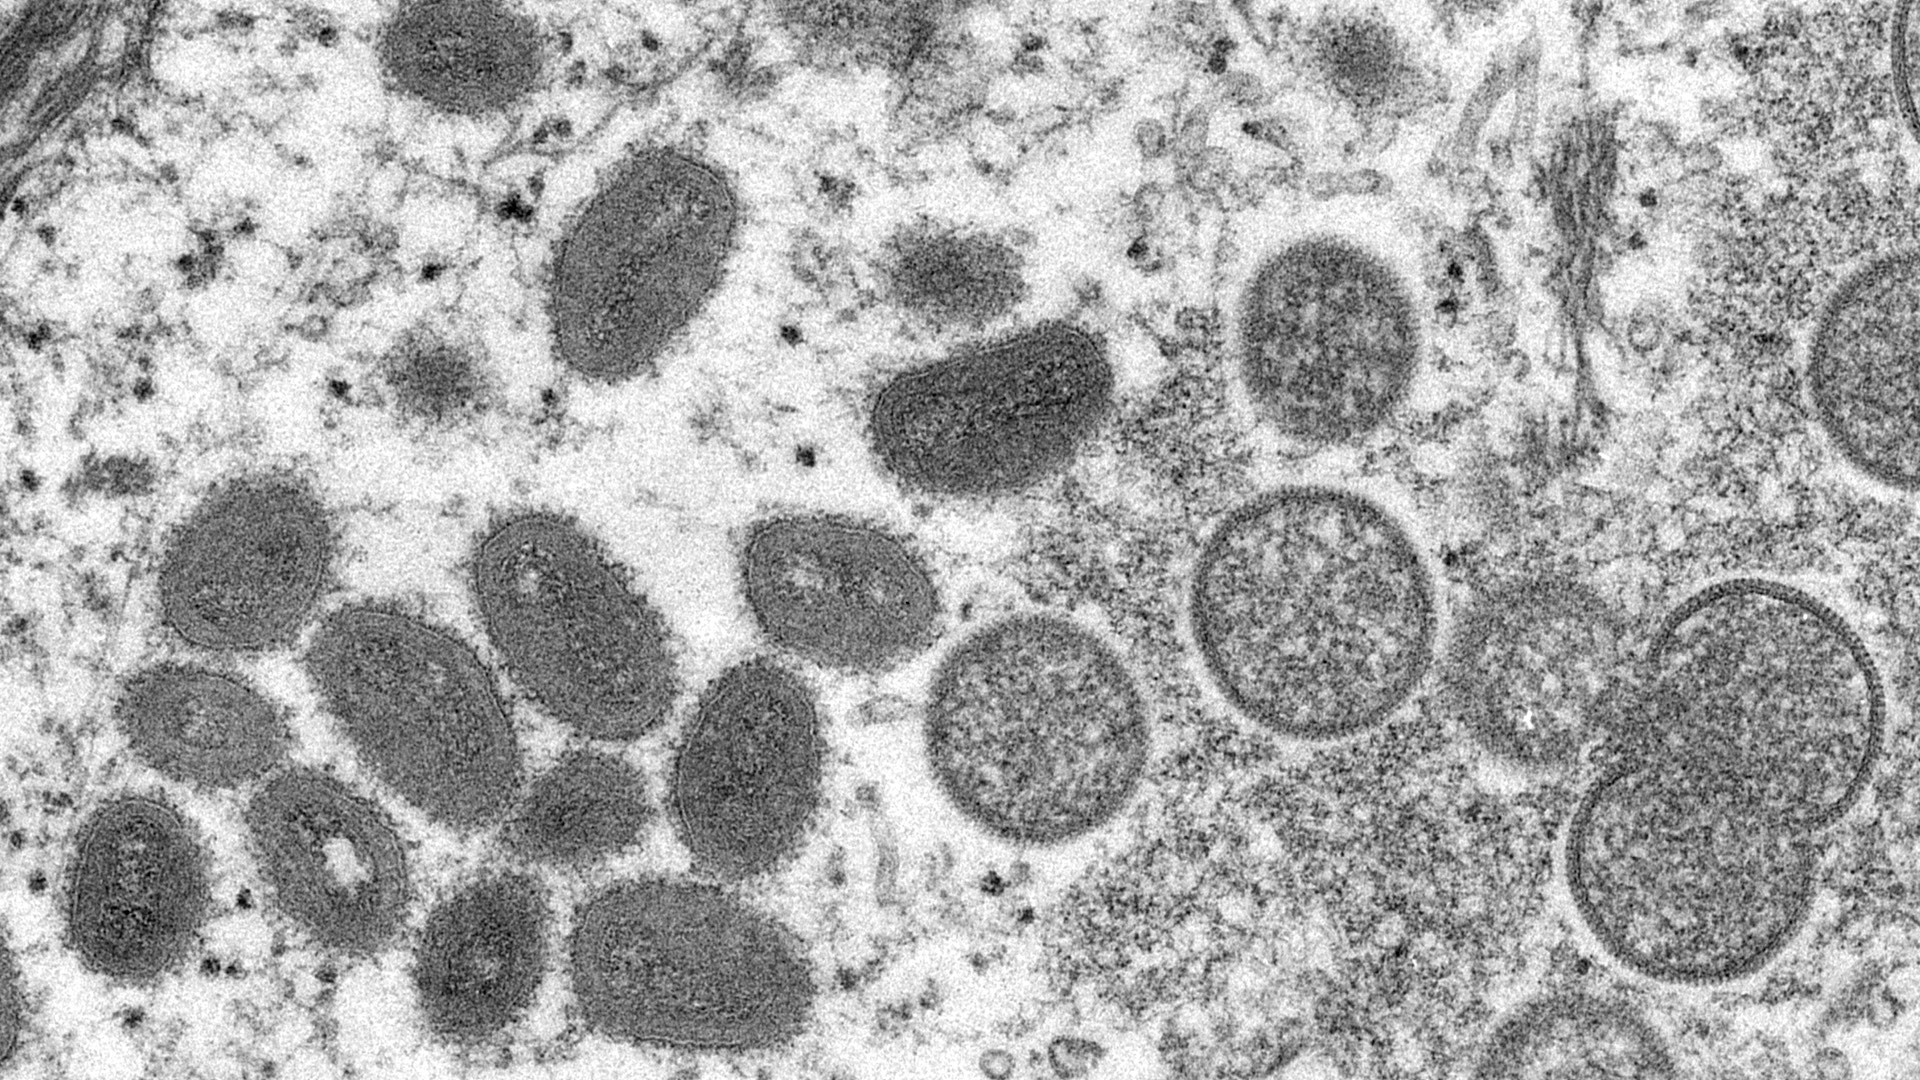 This electron microscopic image depicted monkeypox virus particles, obtained from a clinical sample associated with the 2003 prairie dog outbreak. It was a thin section image from of a human skin sample.